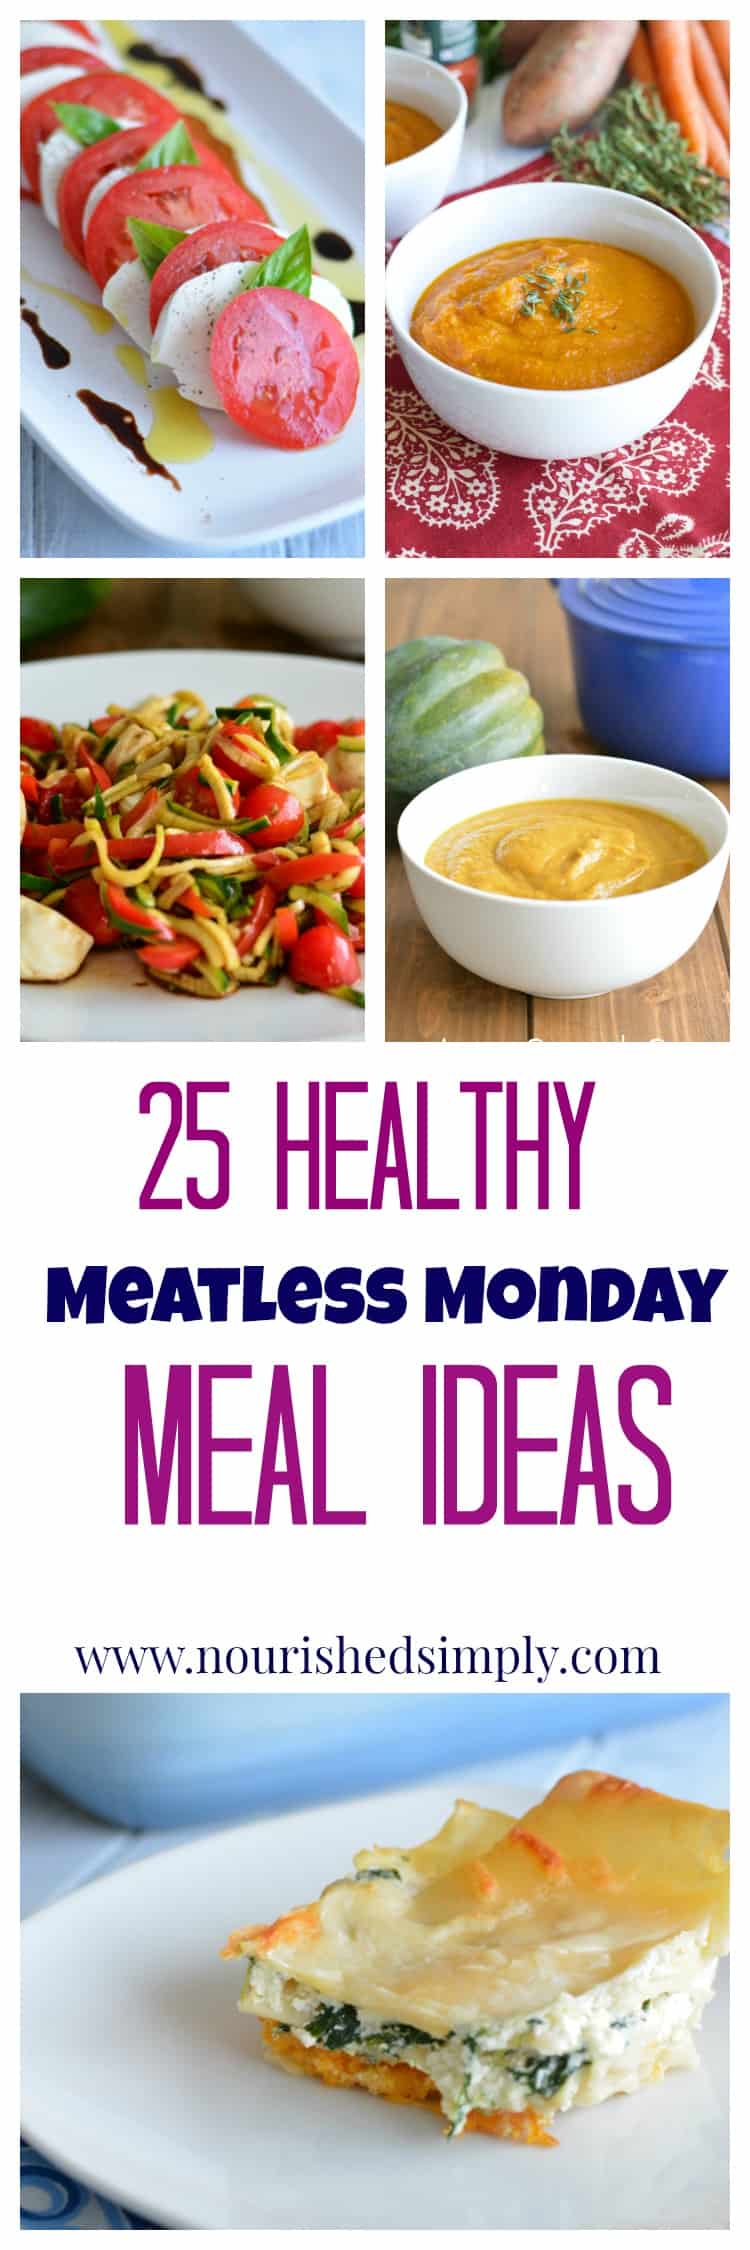 Meatless Monday Meal Ideas